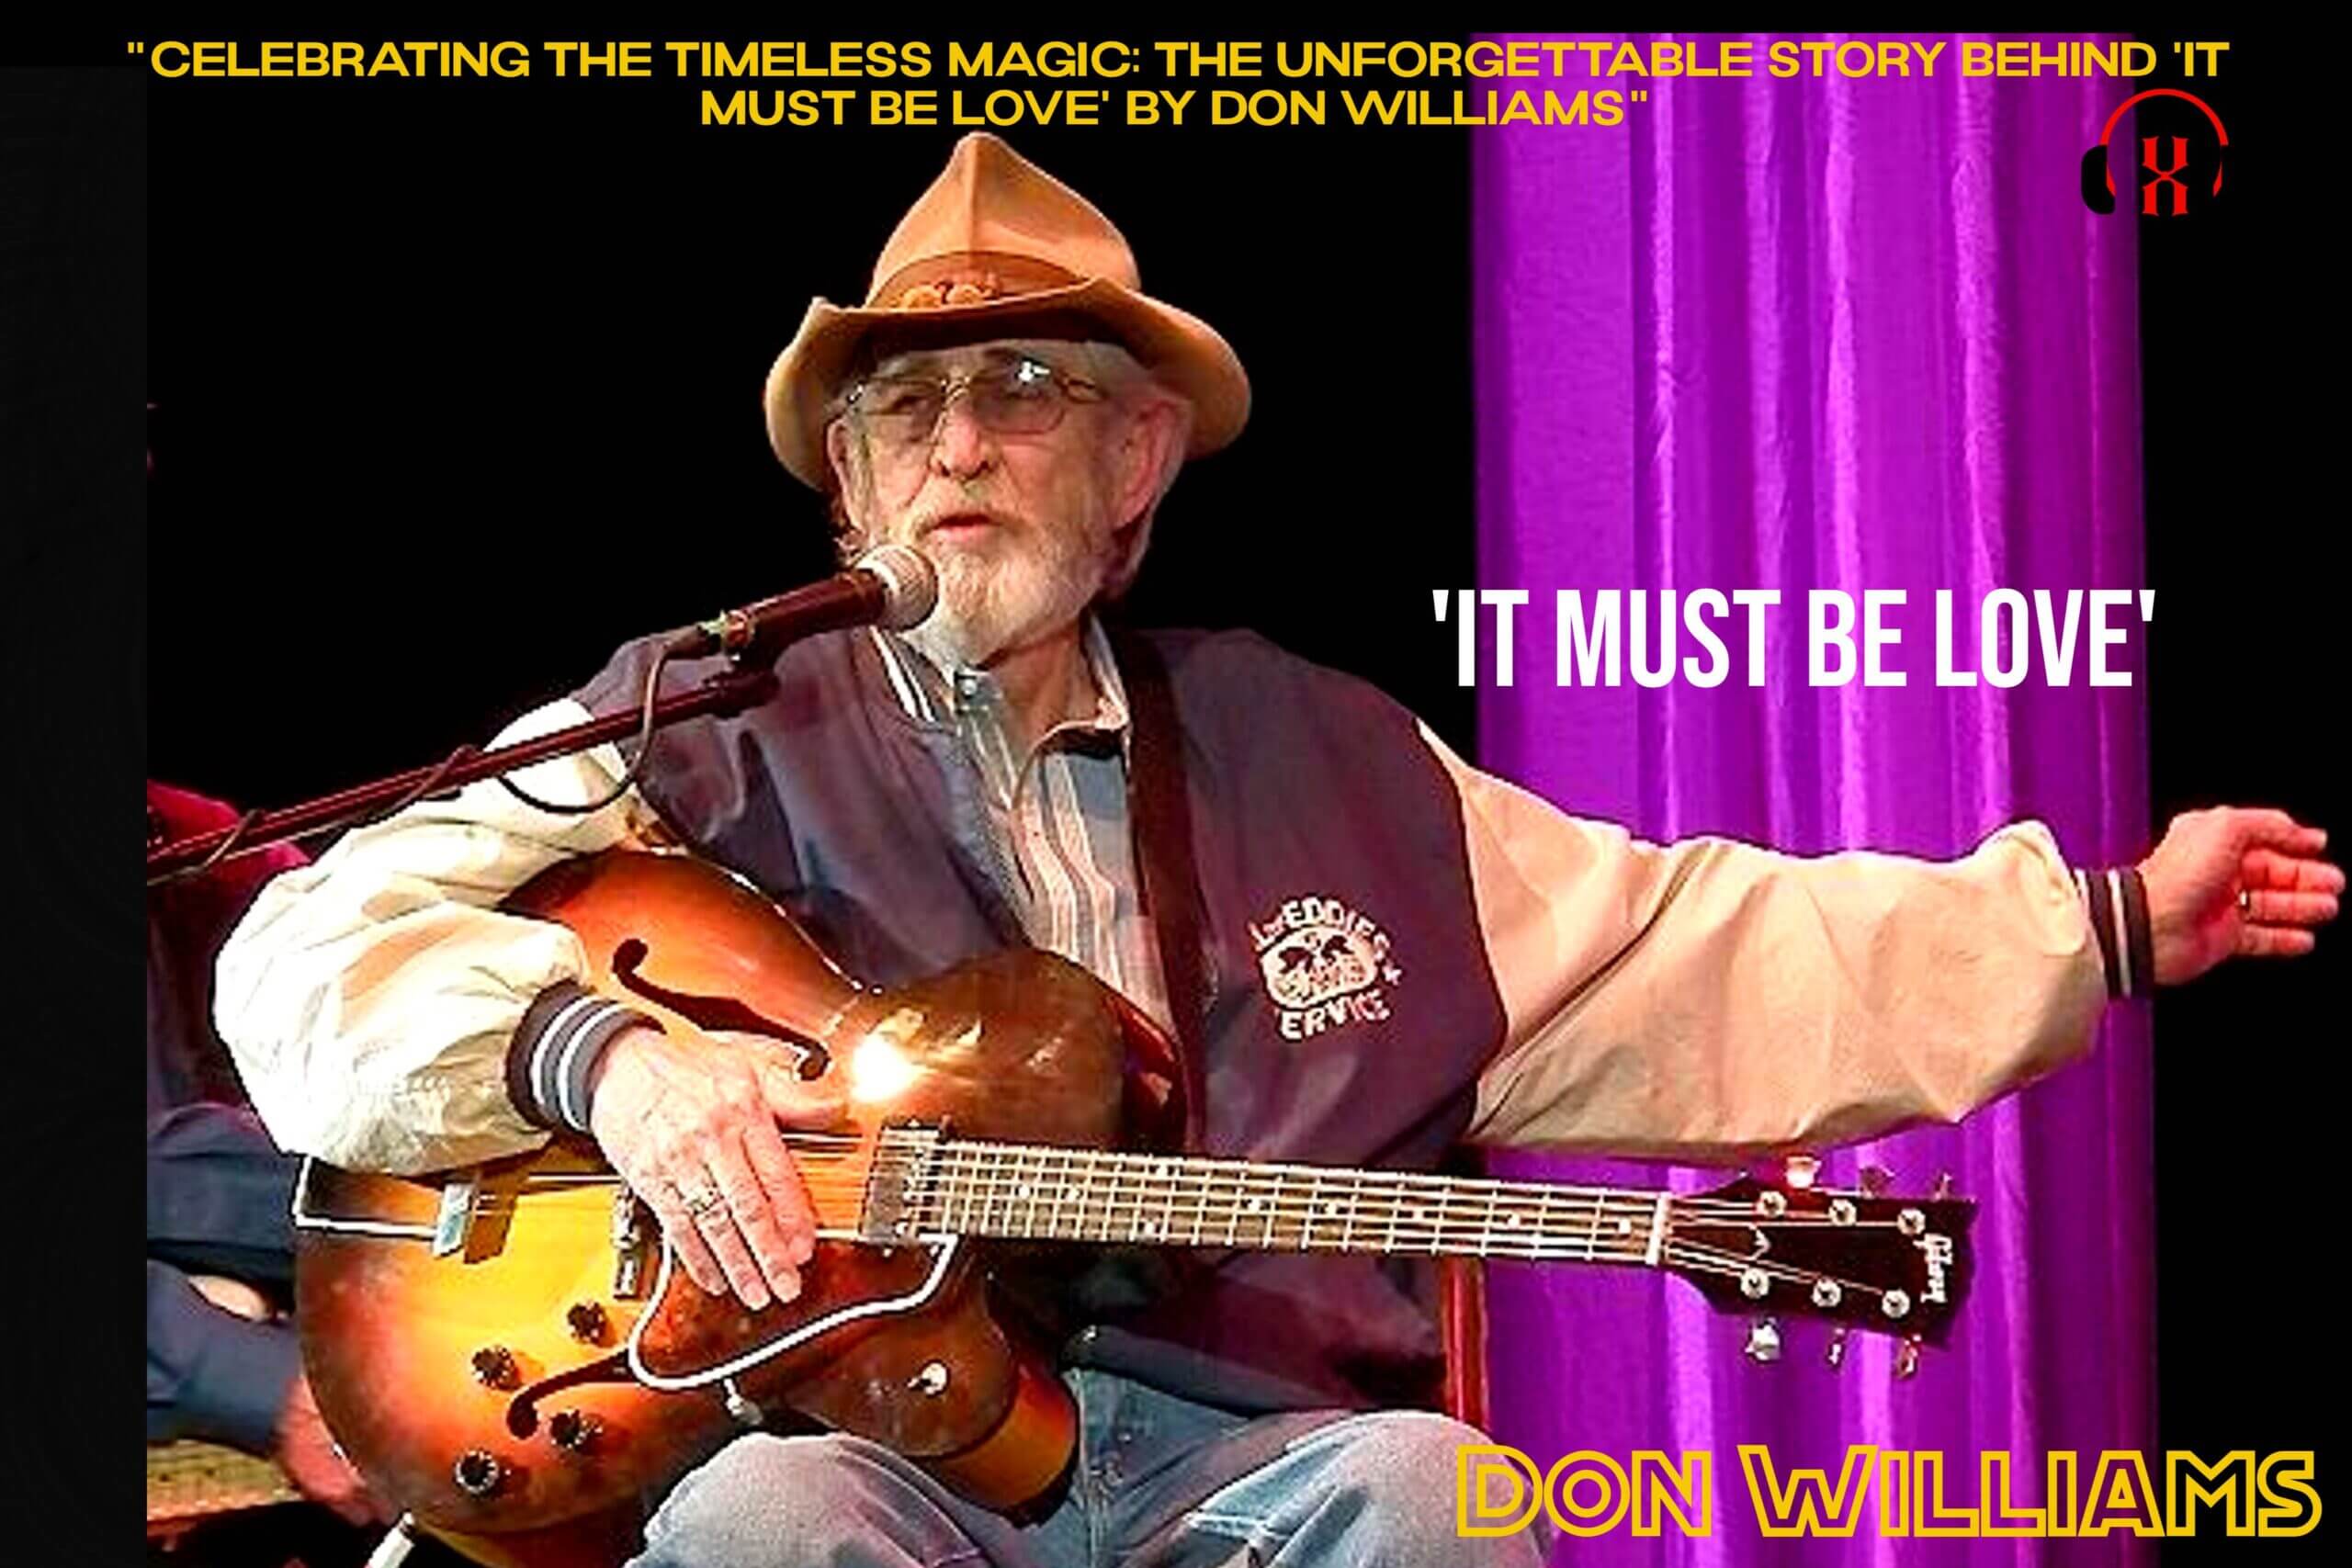 Don Williams The Story Behind 'It Must Be Love' by Don Williams"